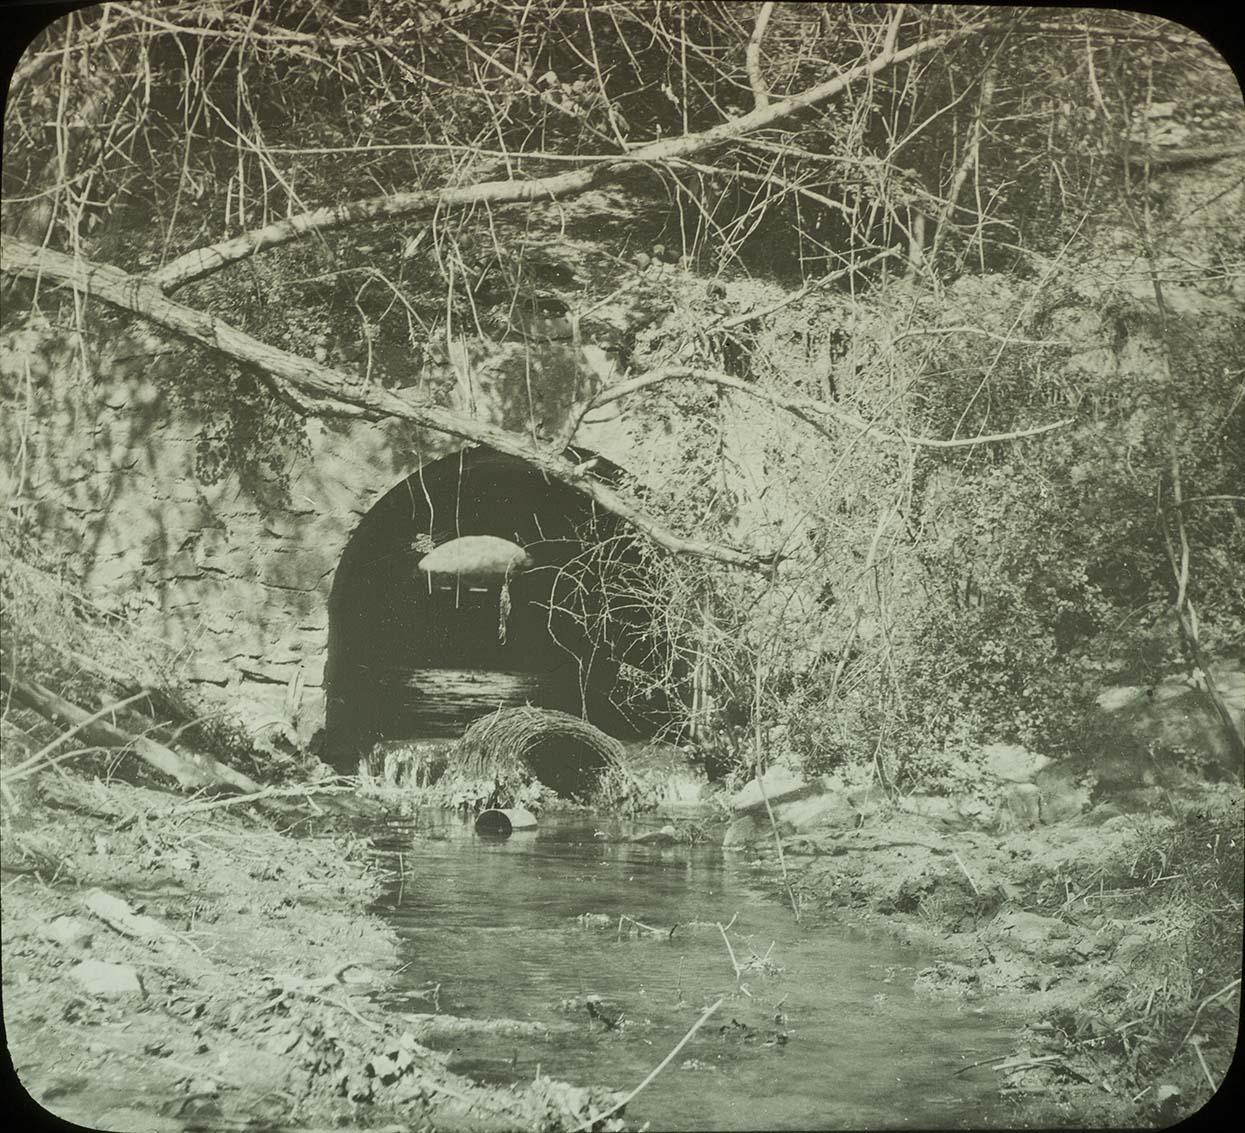 Lantern slide and photograph of the Phoebe nest site